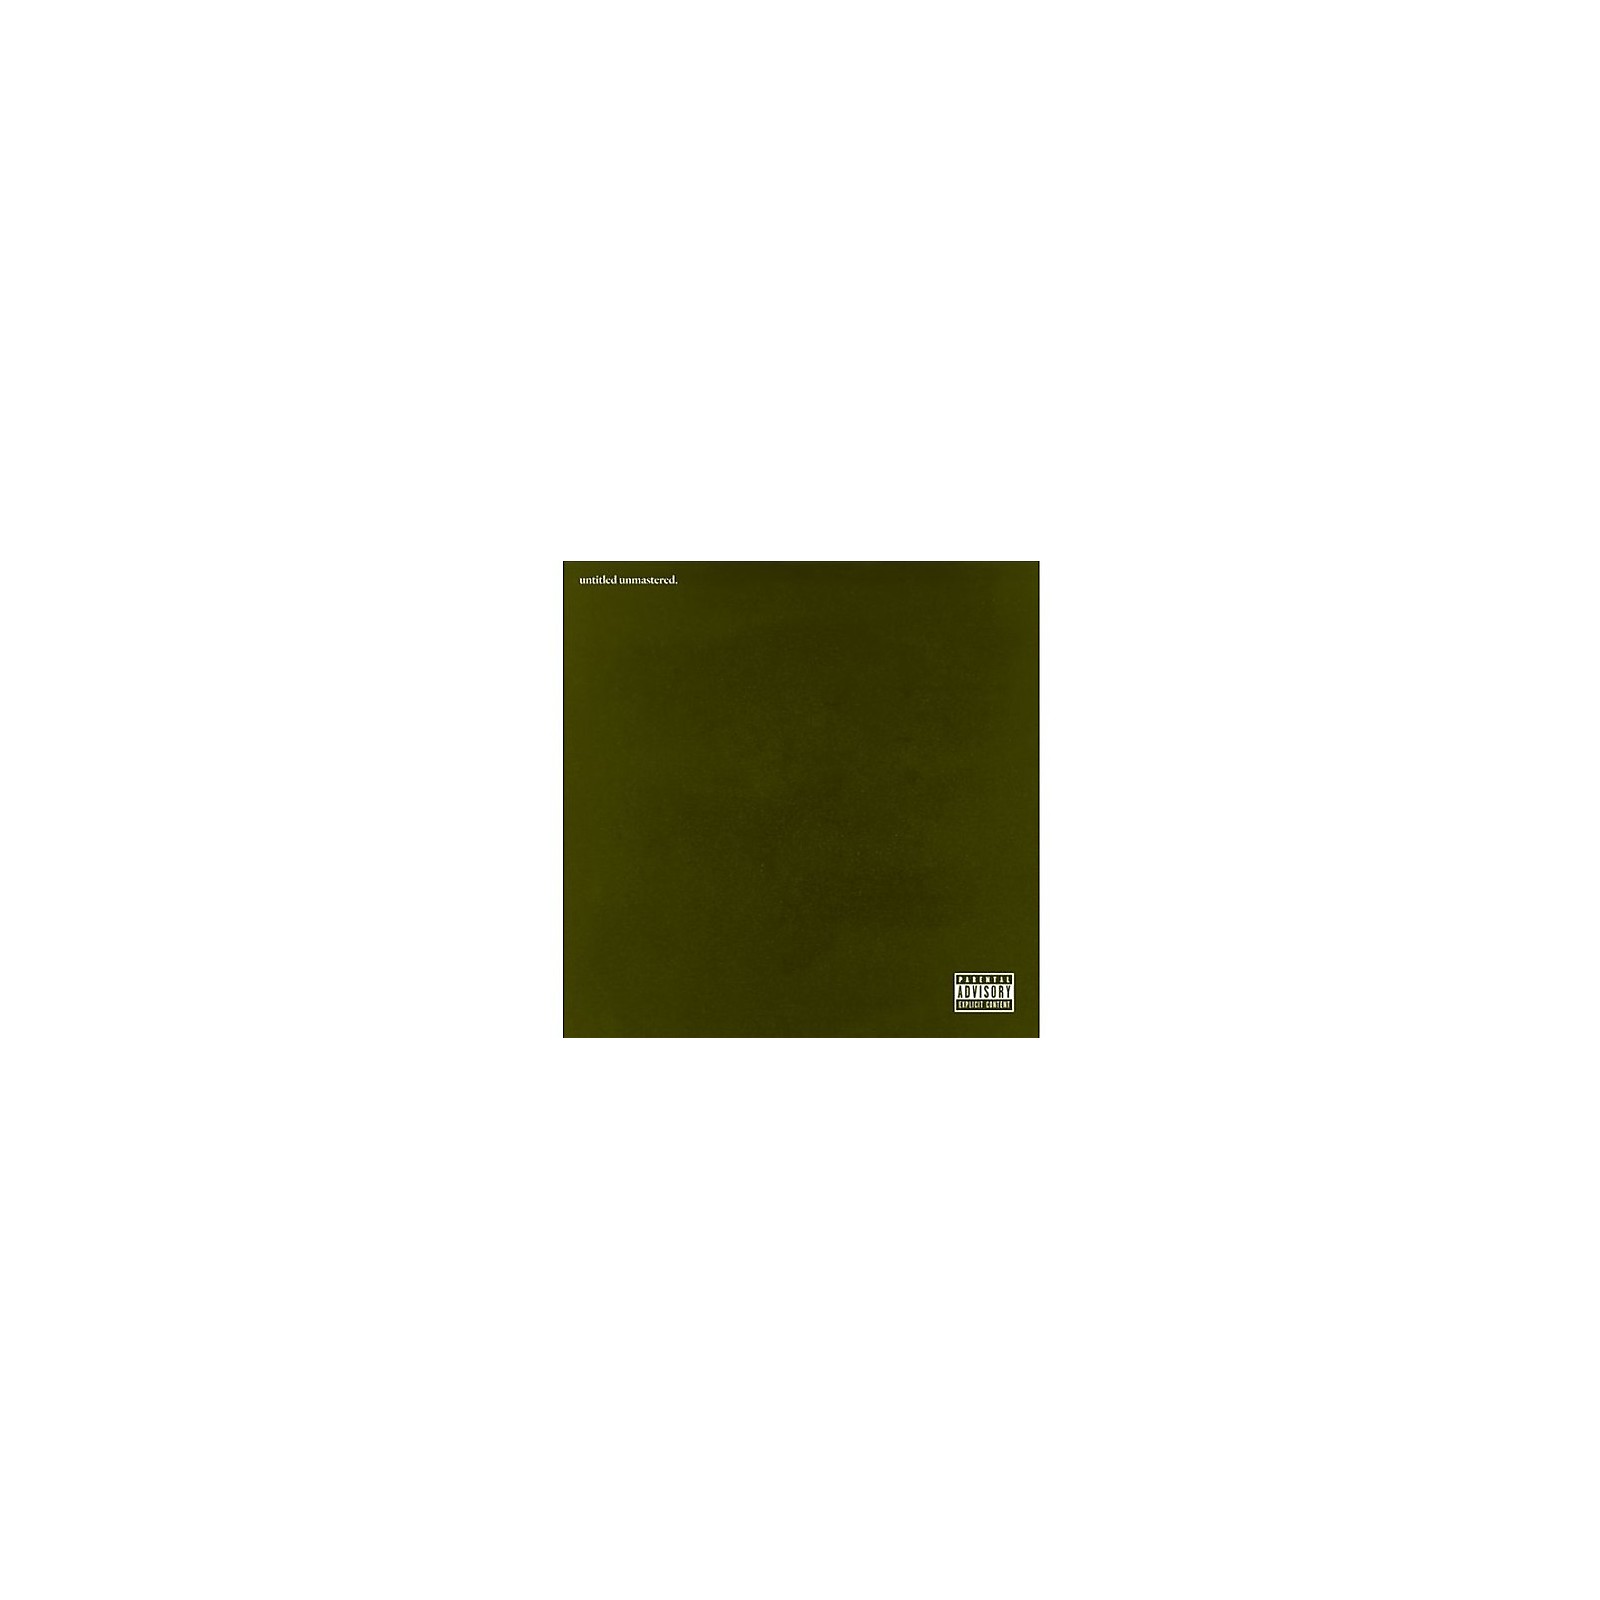 untitled unmastered review